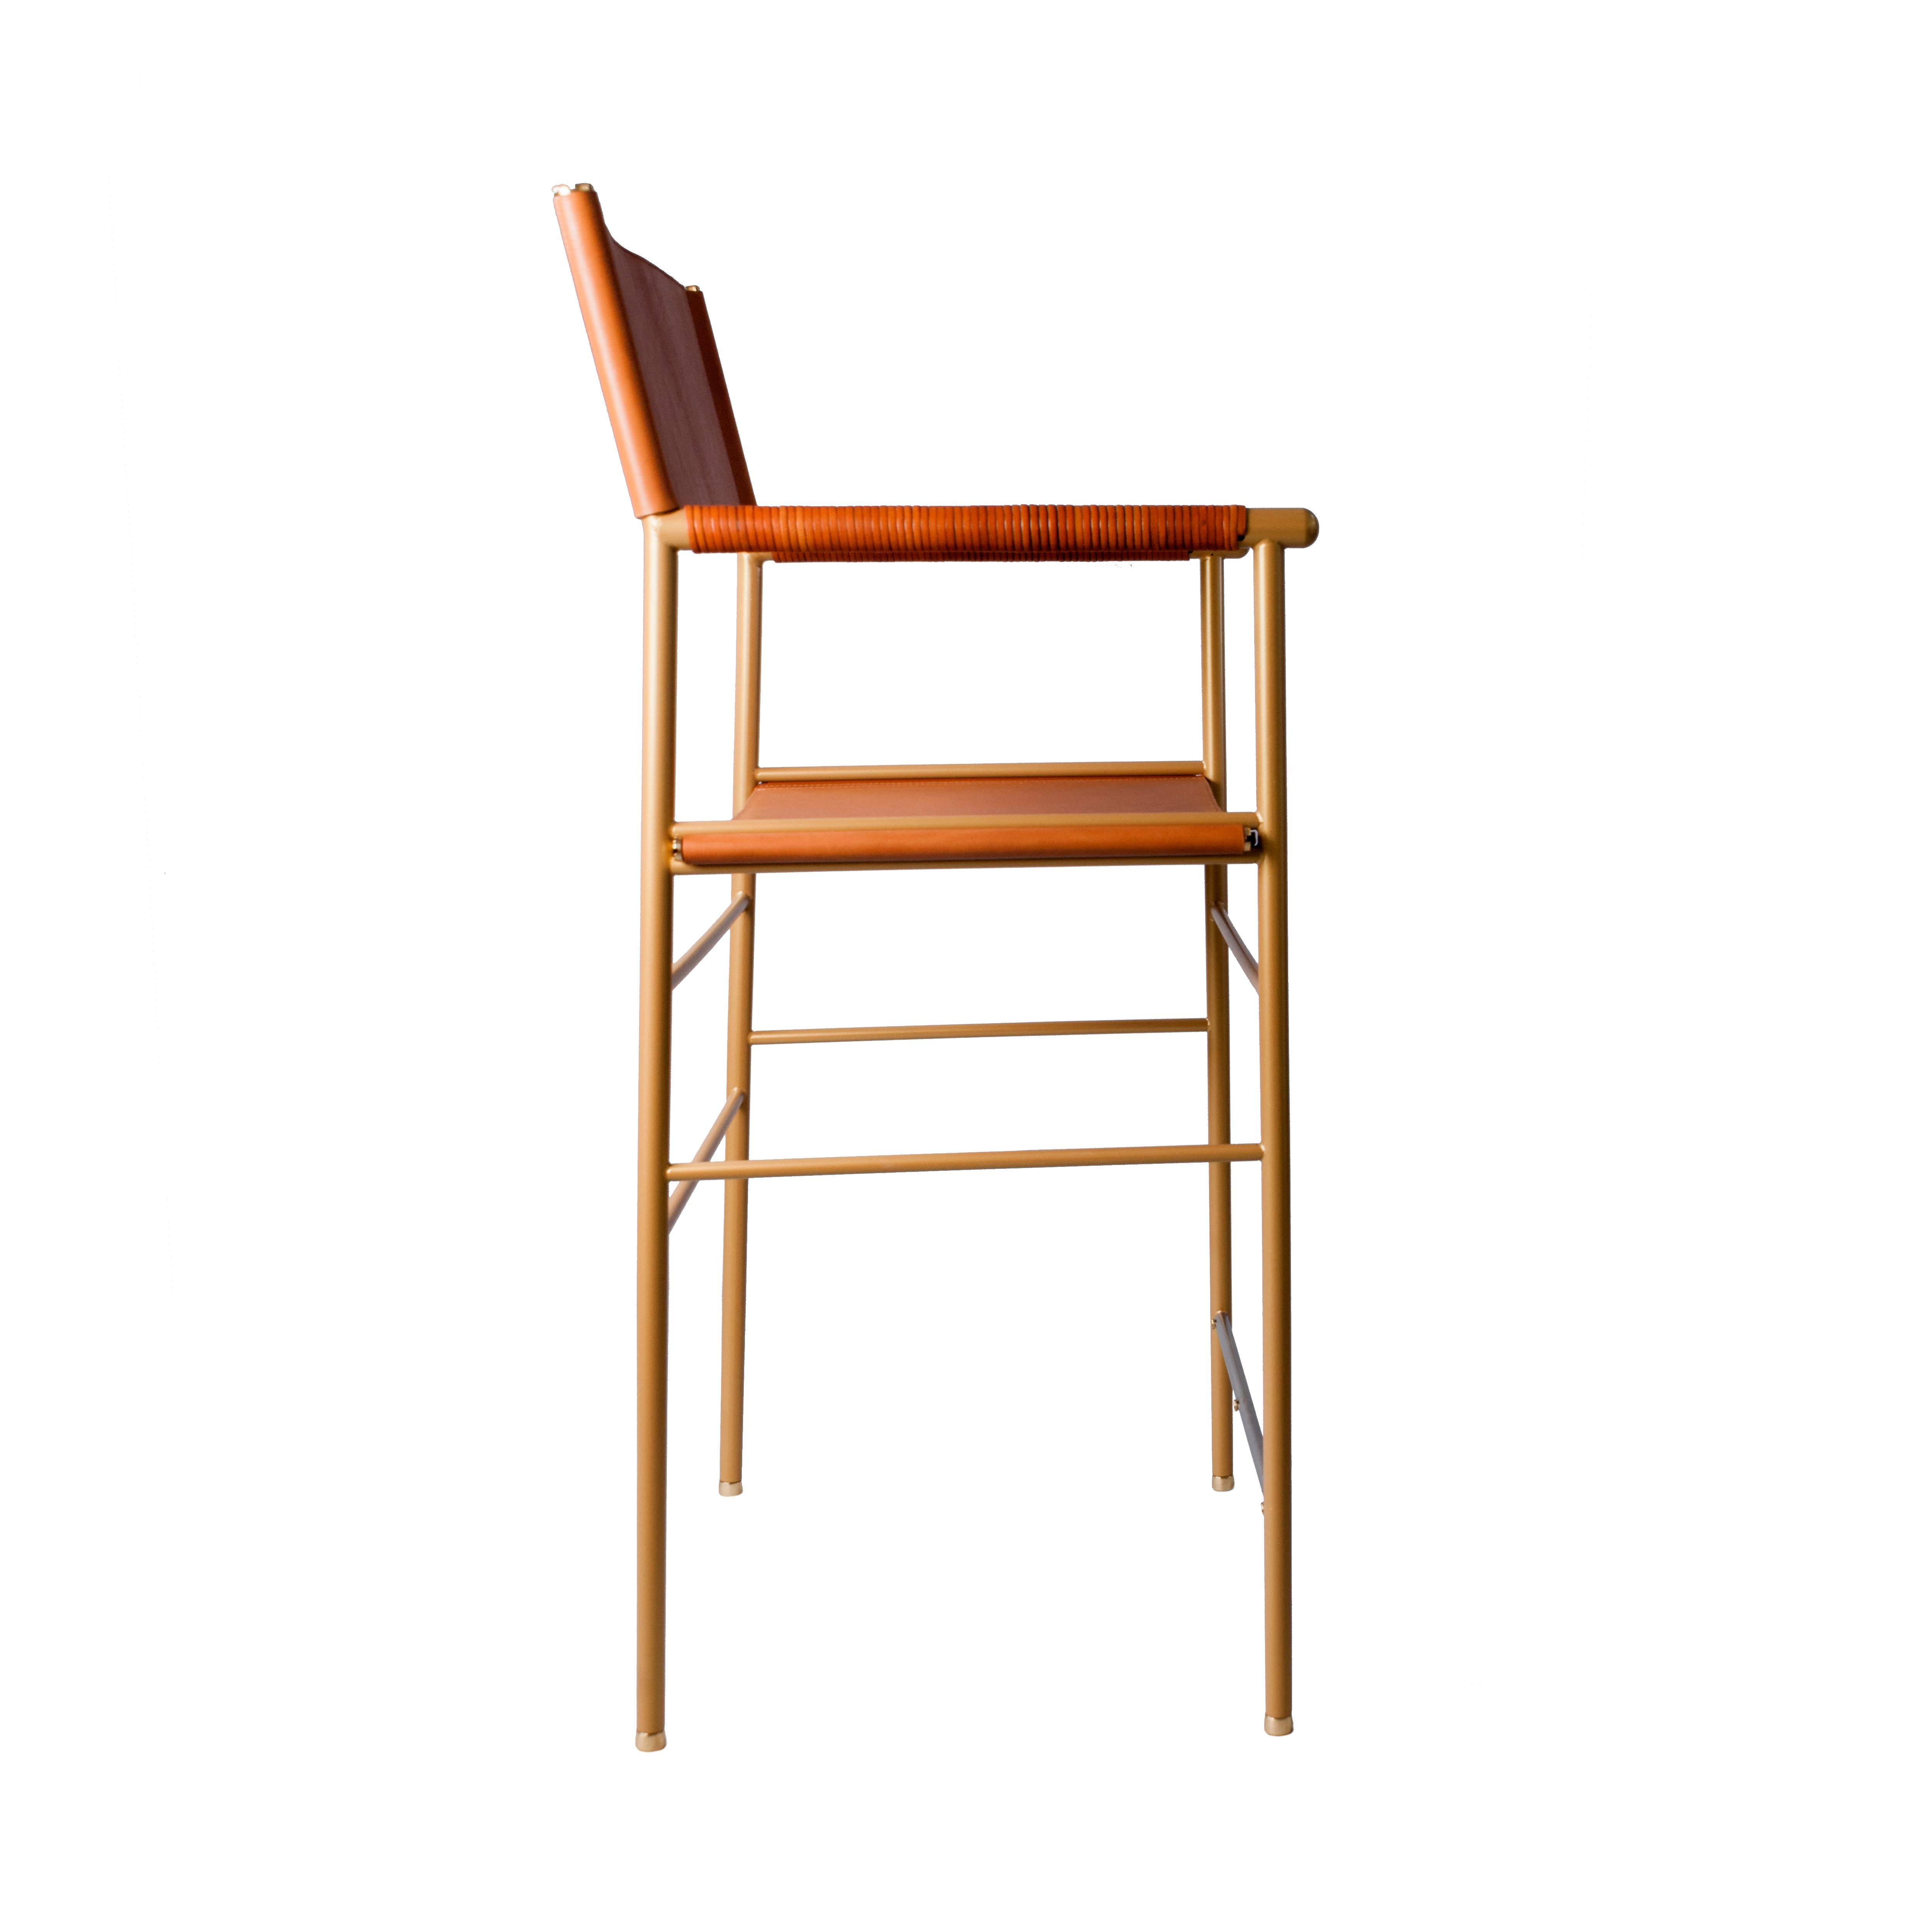 Modern Set of 5 Counter Bar Stools w. Backrest - Tan Leather & Aged Brass Powder Coated For Sale